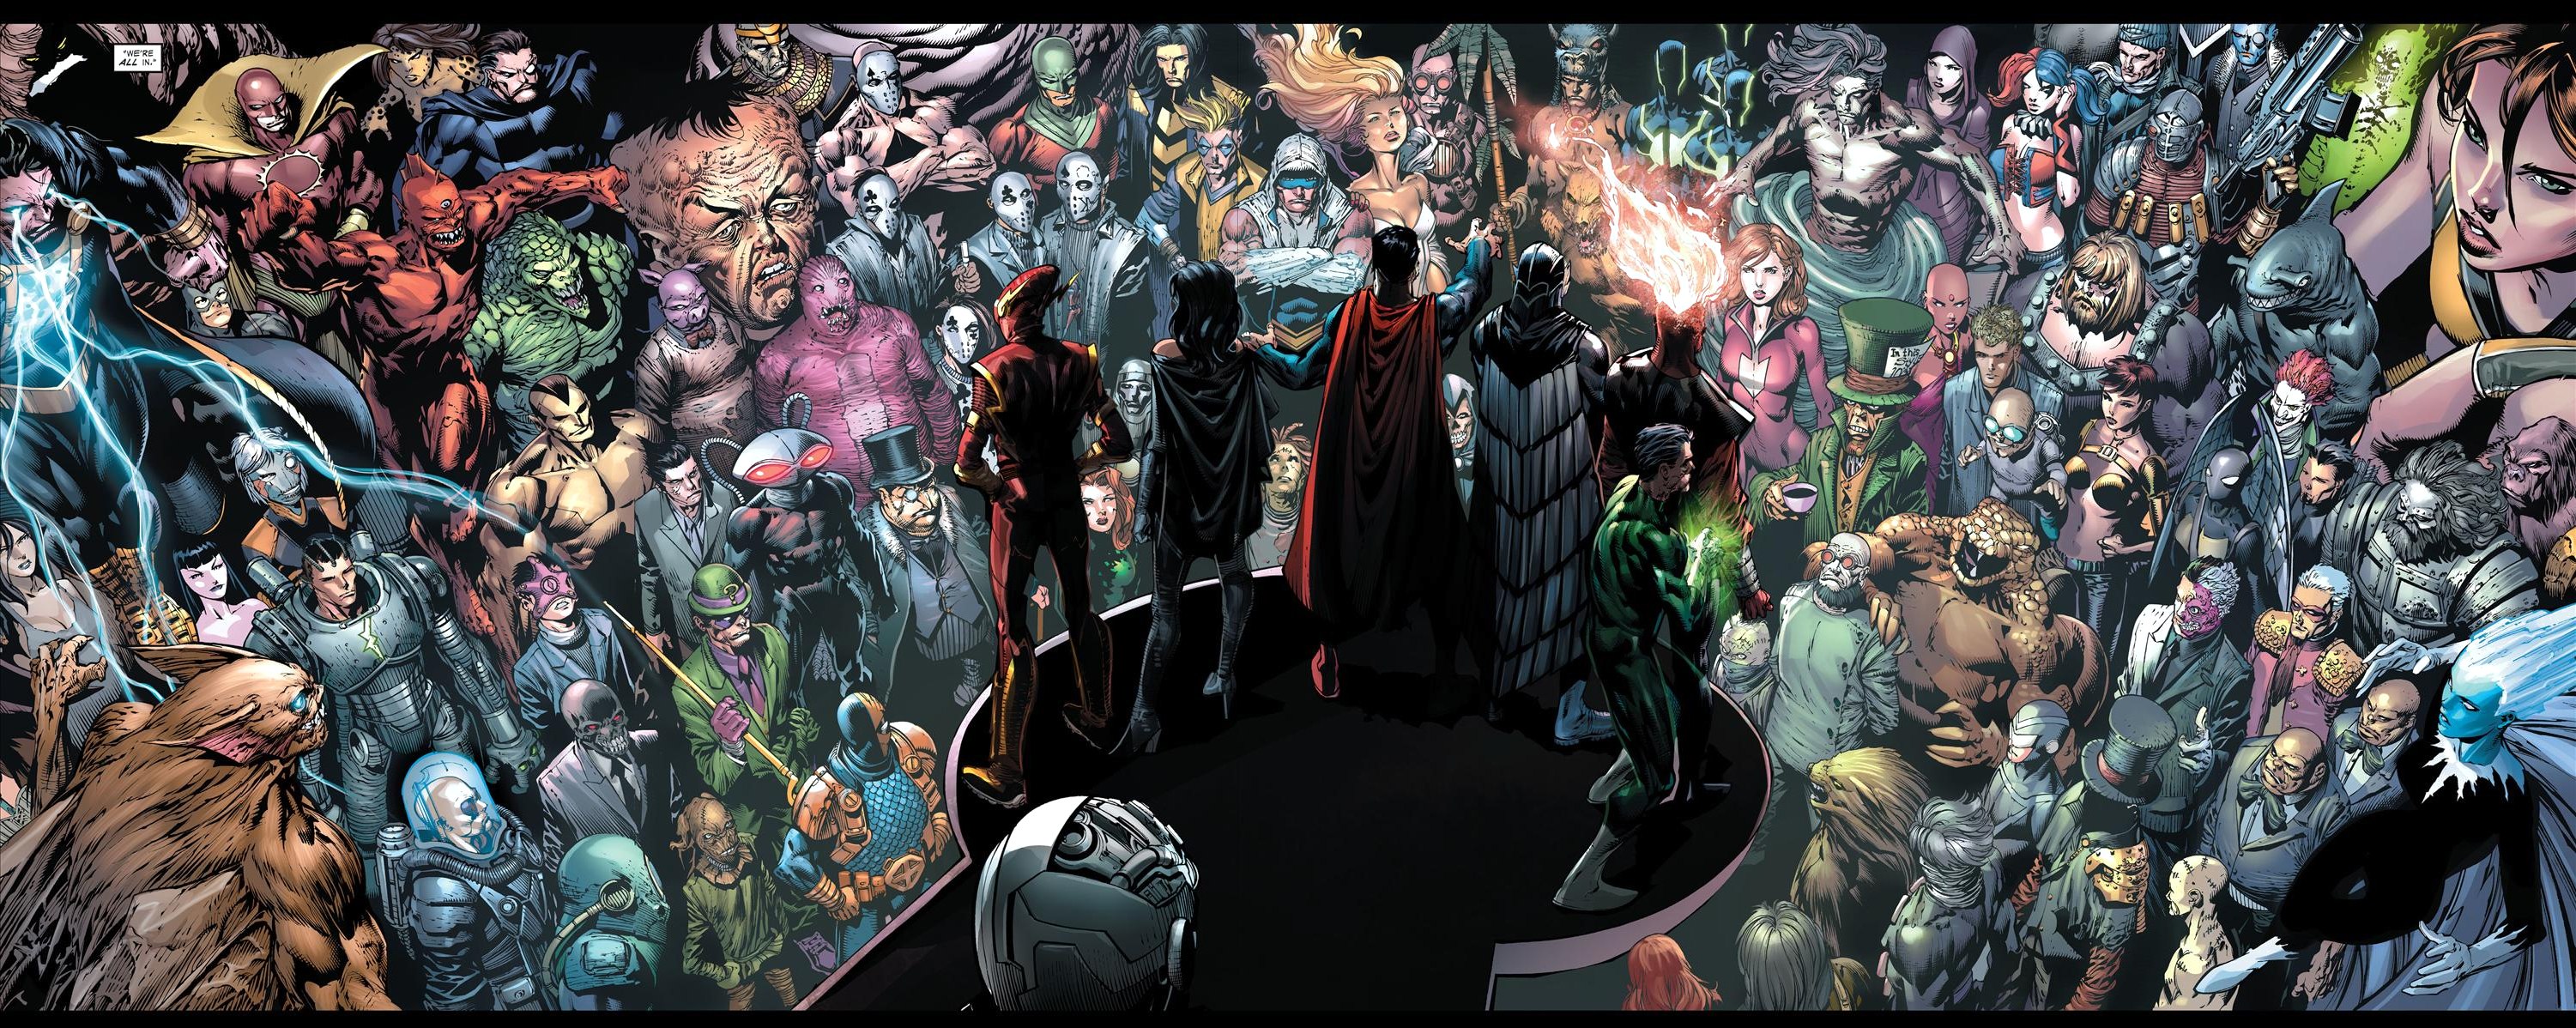 the crime syndicate gathers all super villains